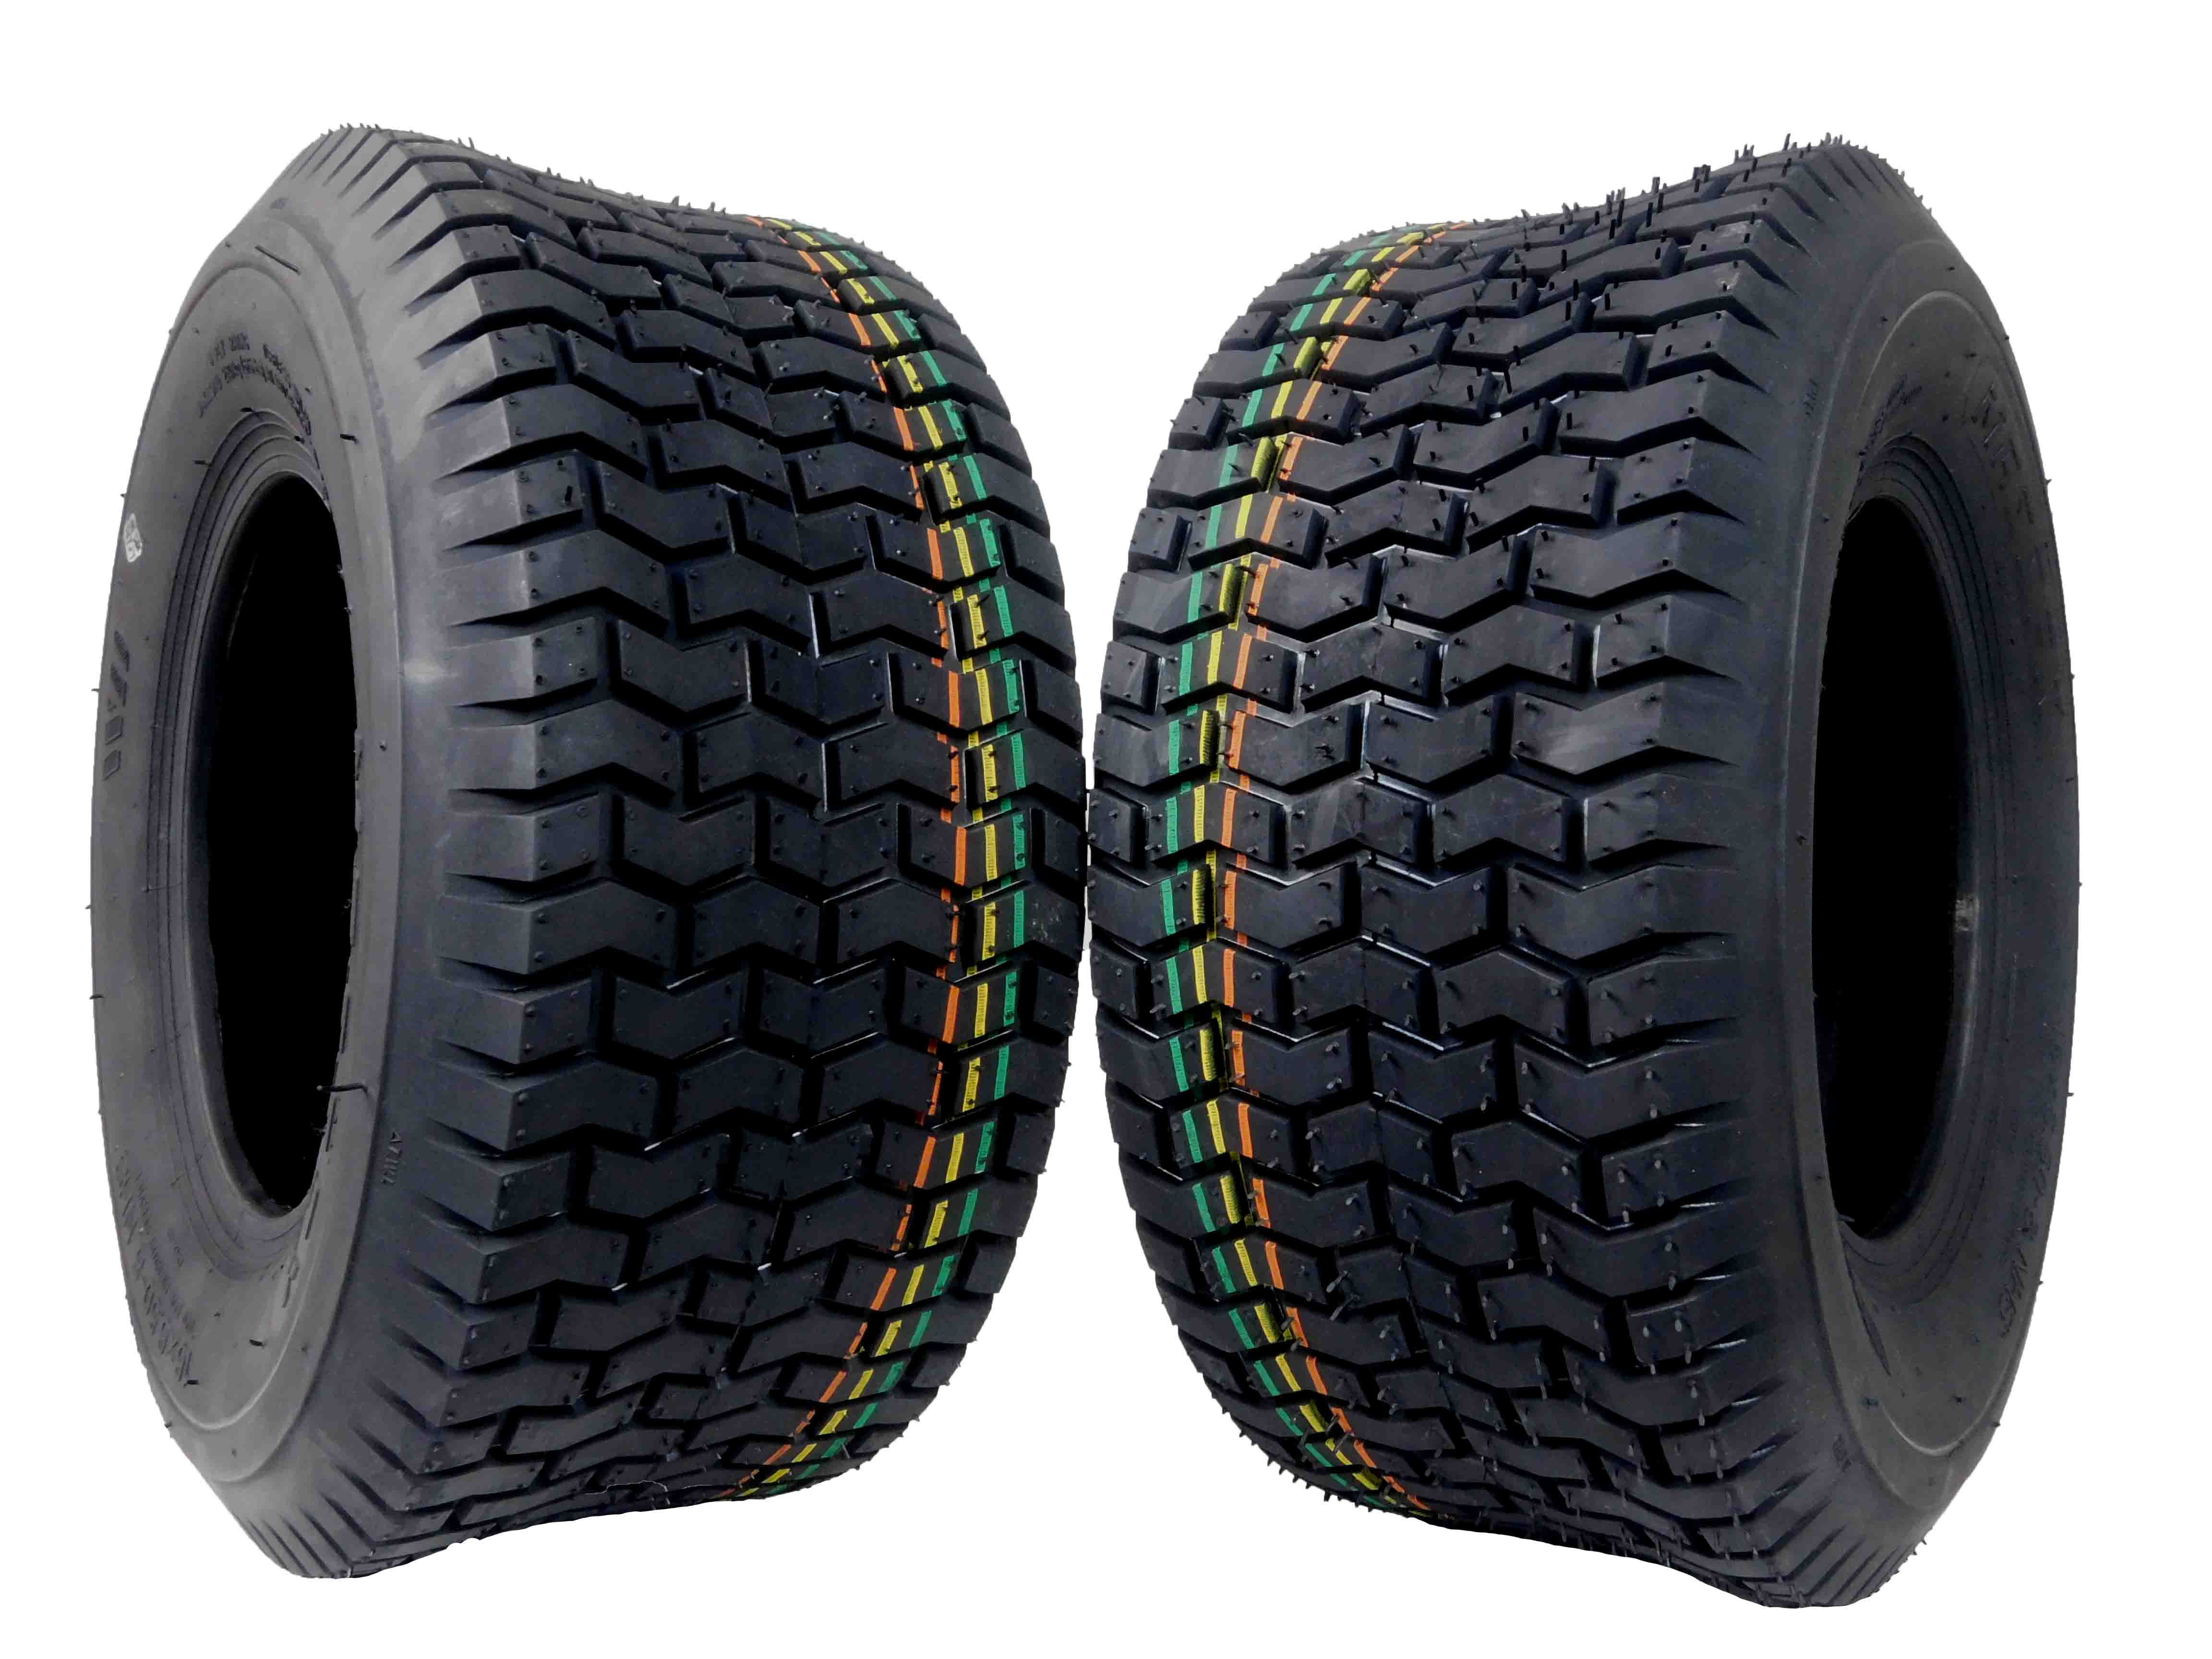 TWO New 16x6.50-8 4P Lawn Tractor Tires Turf Master Style 16x6.5-8 FREE SHIP! 